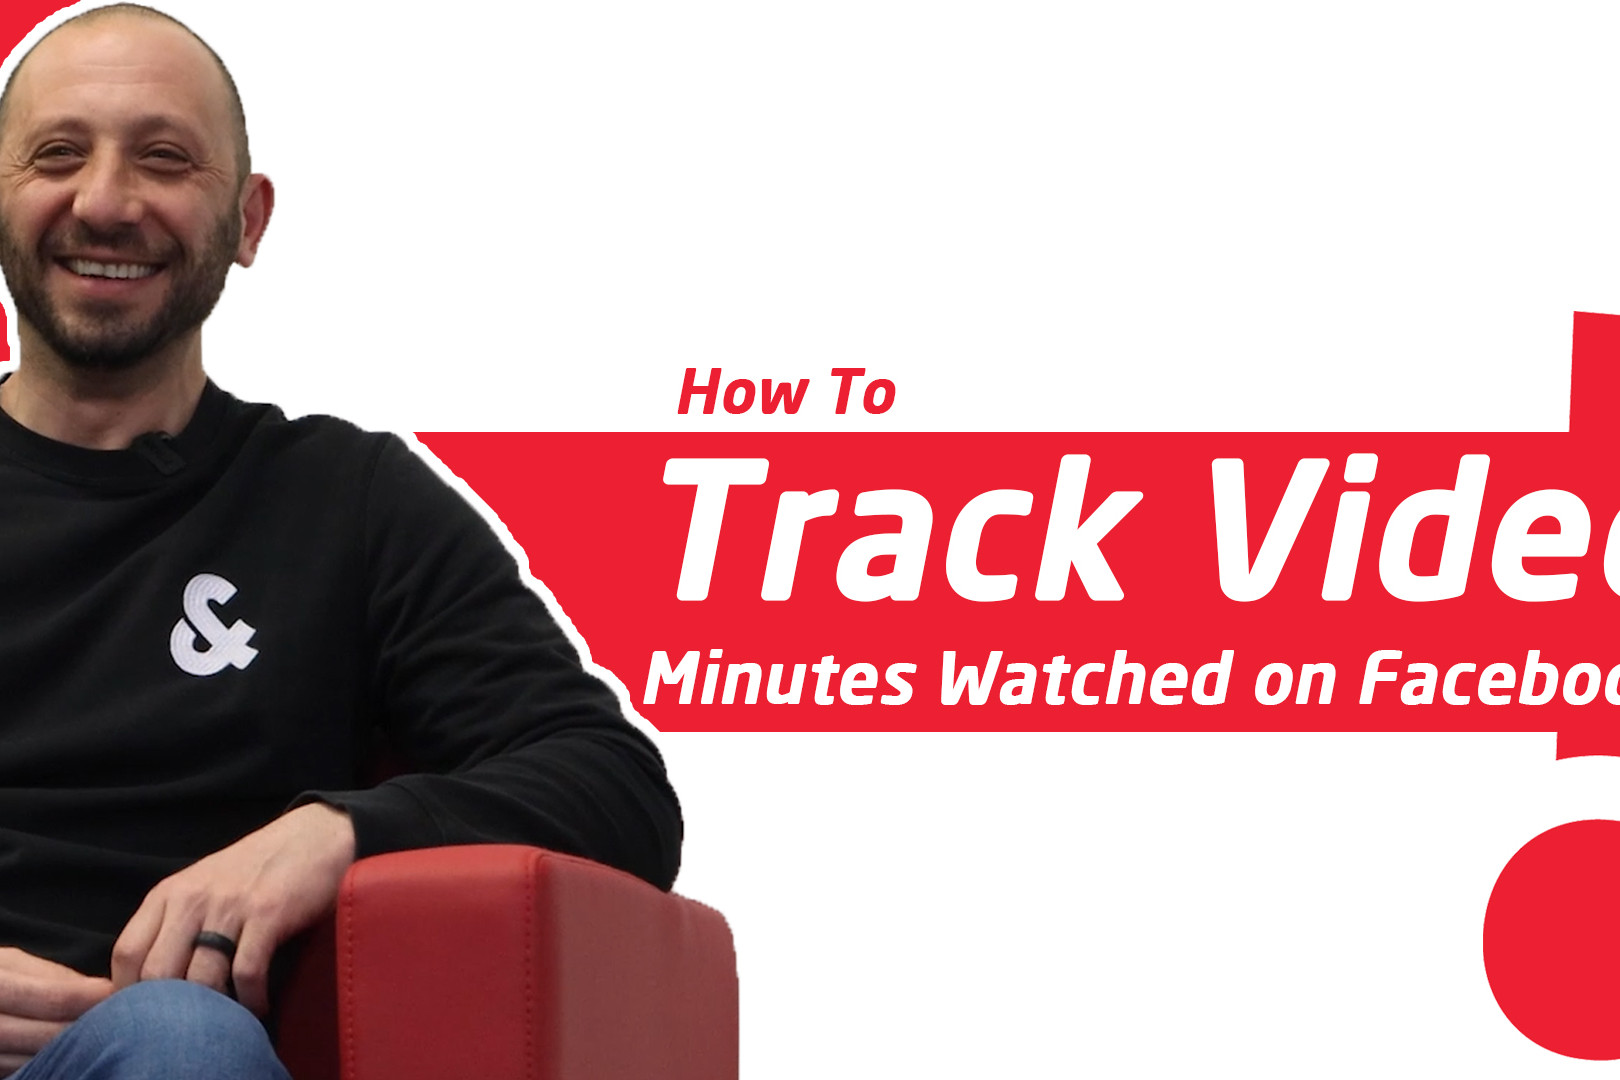 how to track video minutes watched on facebook blog post thumbnail